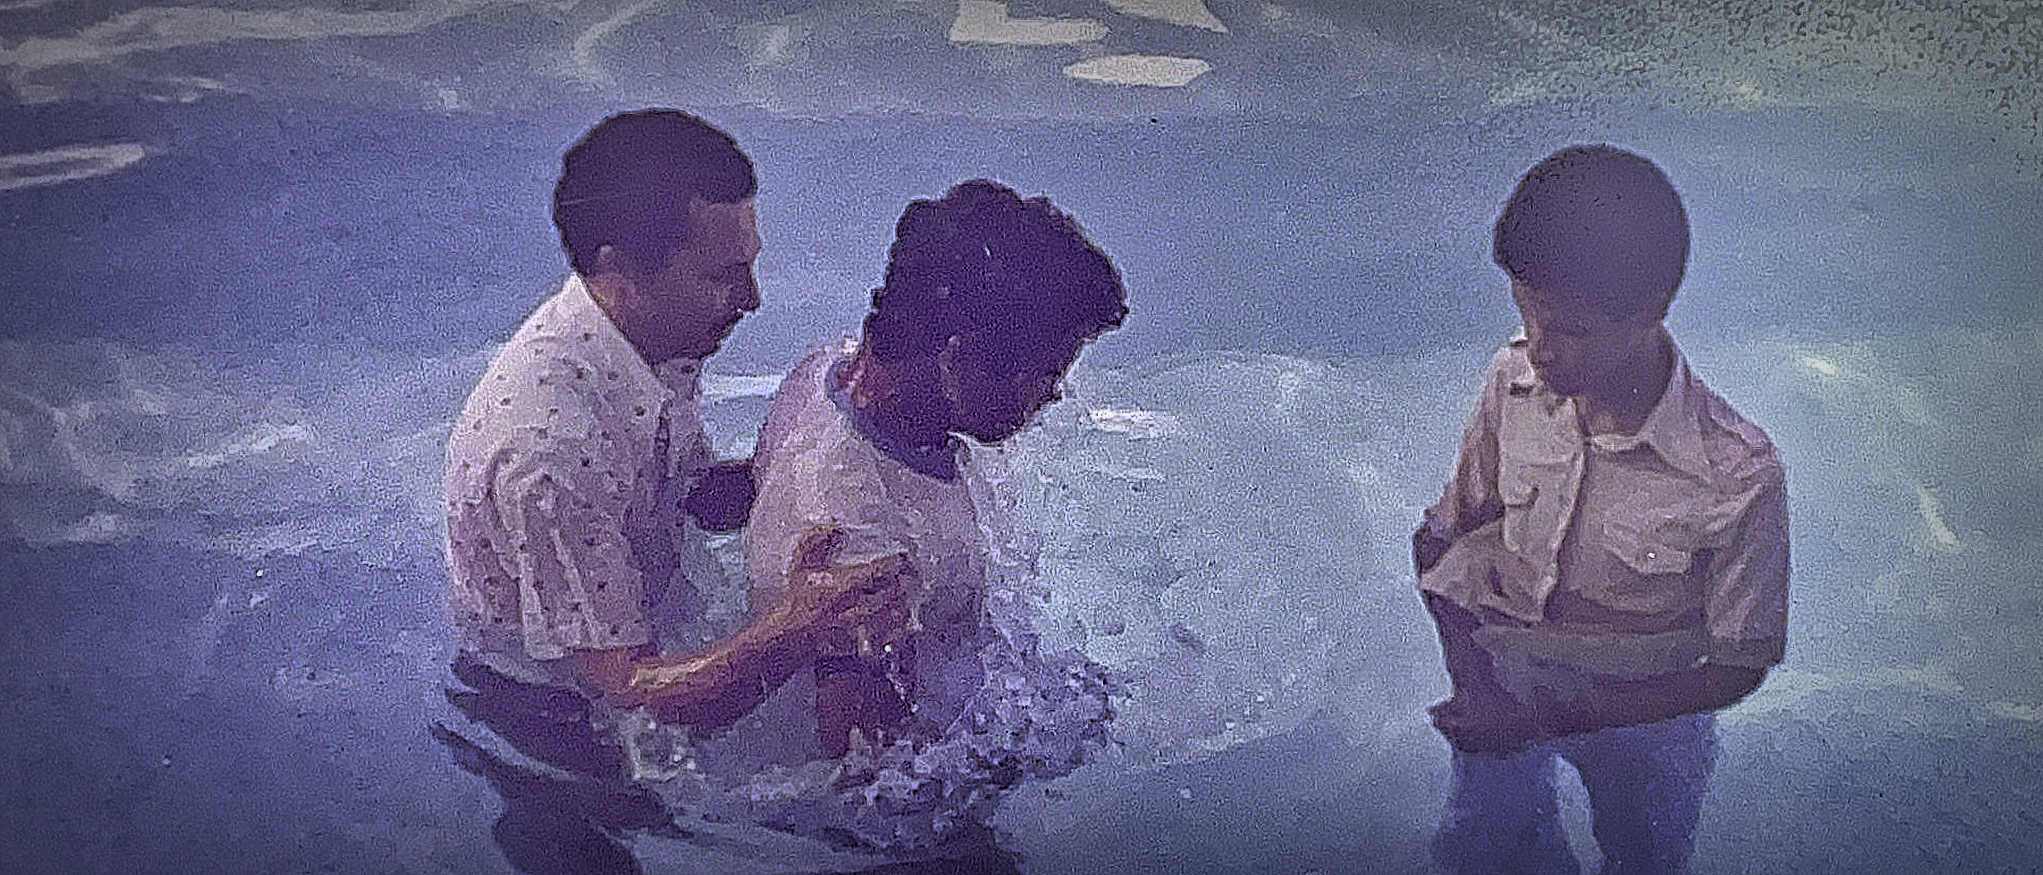 Pastor baptizing a young man as another young man watches